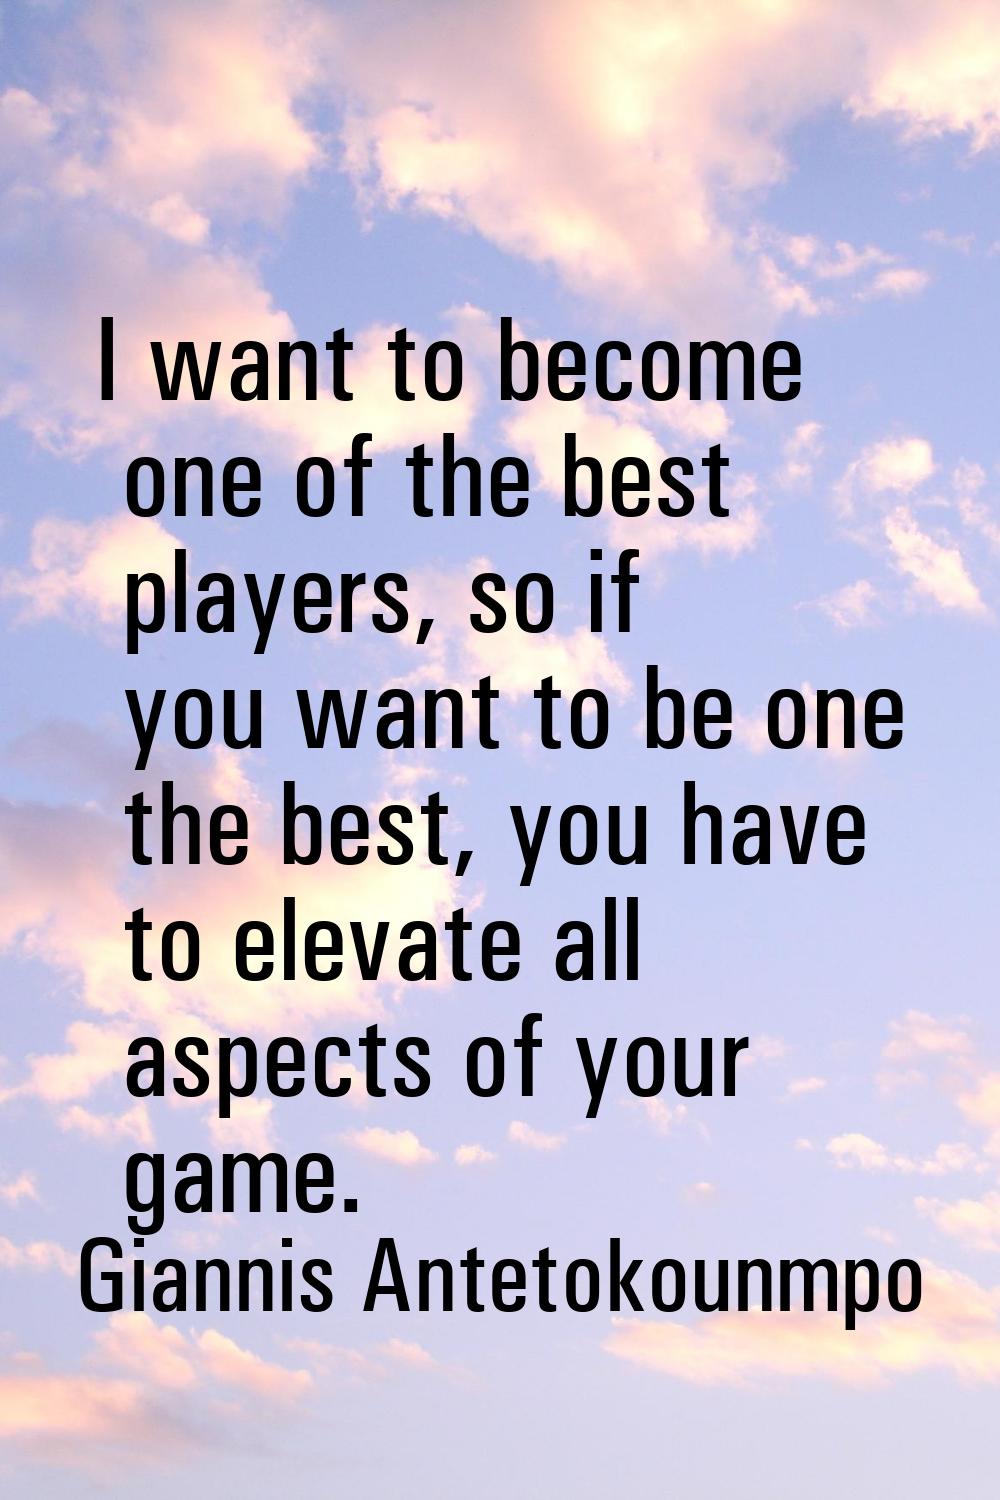 I want to become one of the best players, so if you want to be one the best, you have to elevate al